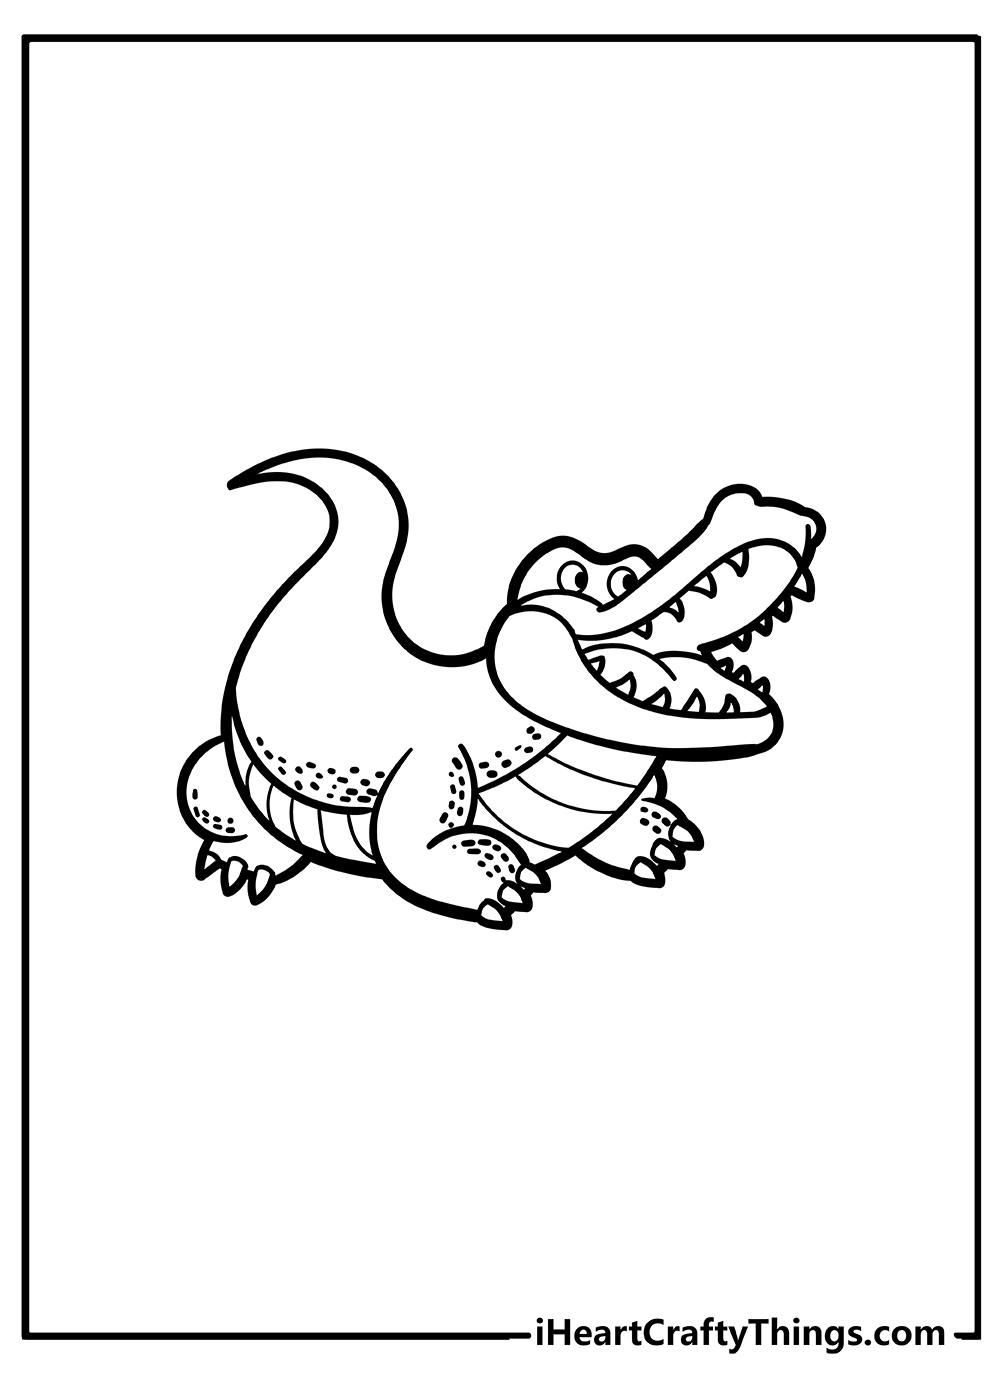 Crocodile Coloring Pages for adults free printable